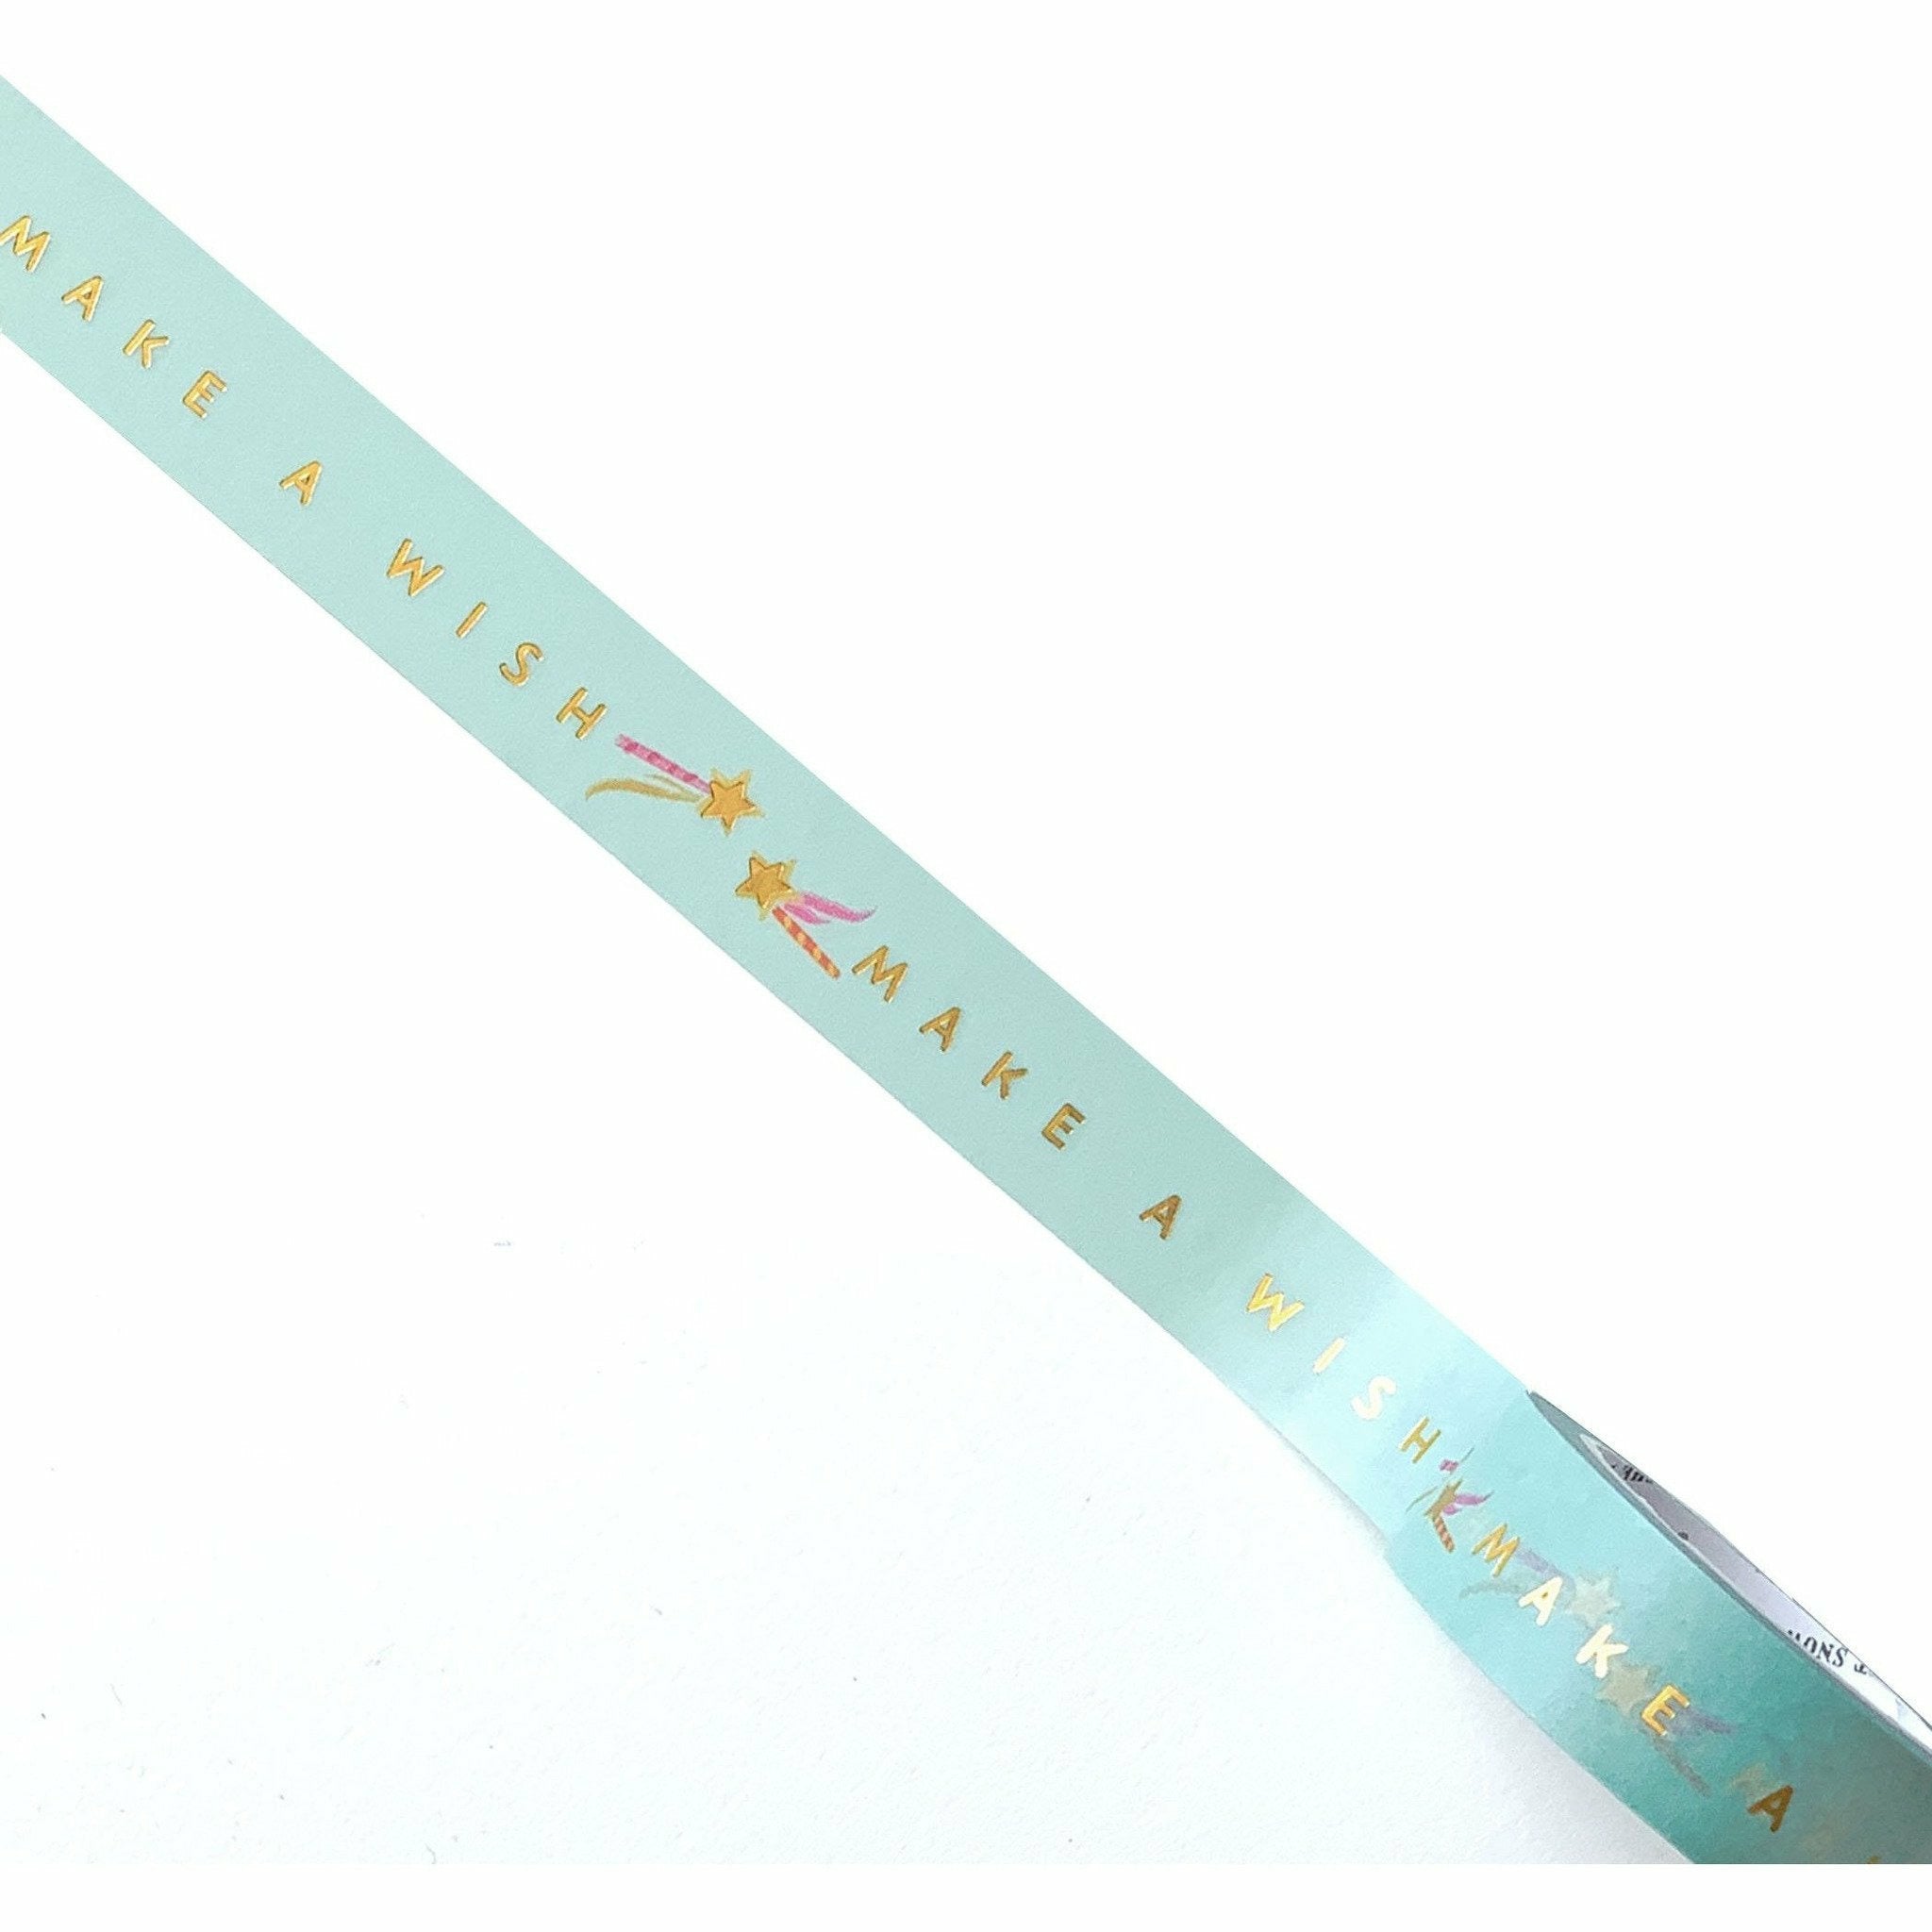 "Make a Wish" Shooting Star Washi Tape for Packaging and Decorating - The First Snow